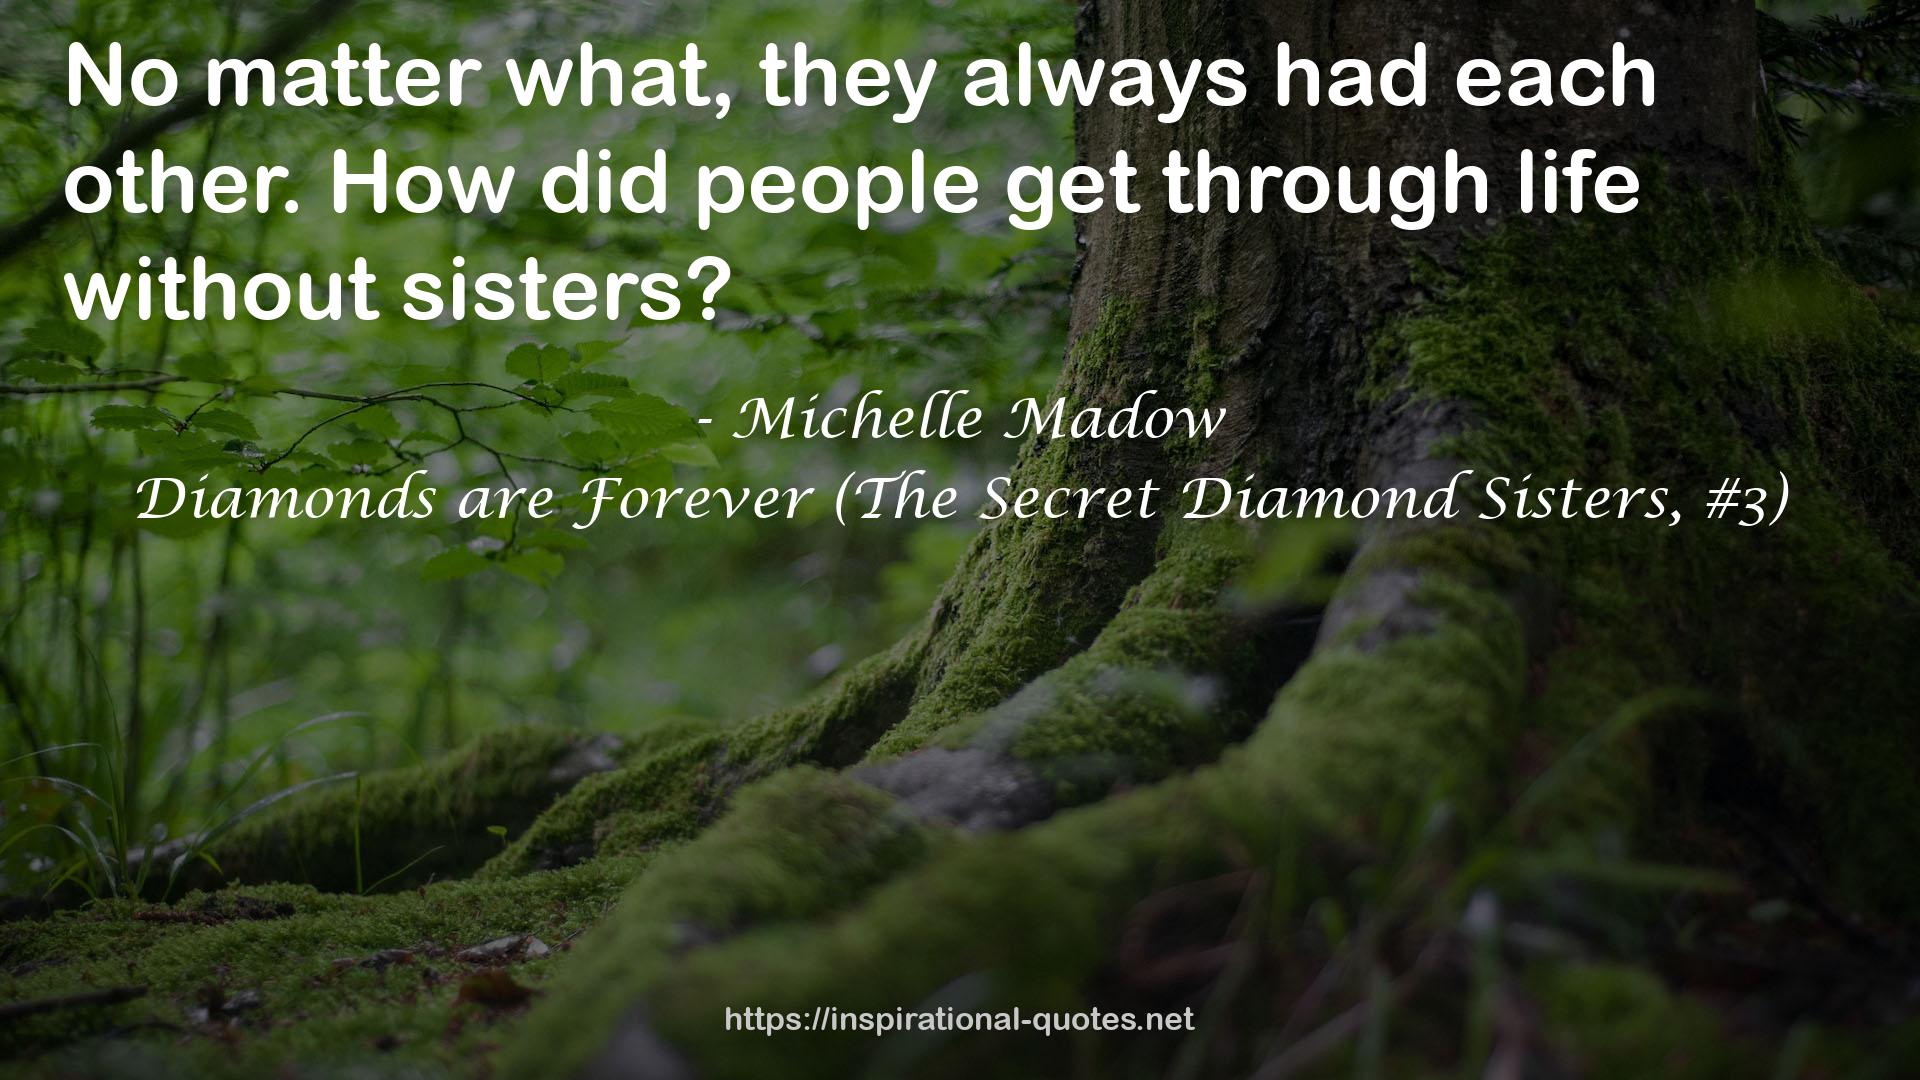 Michelle Madow QUOTES